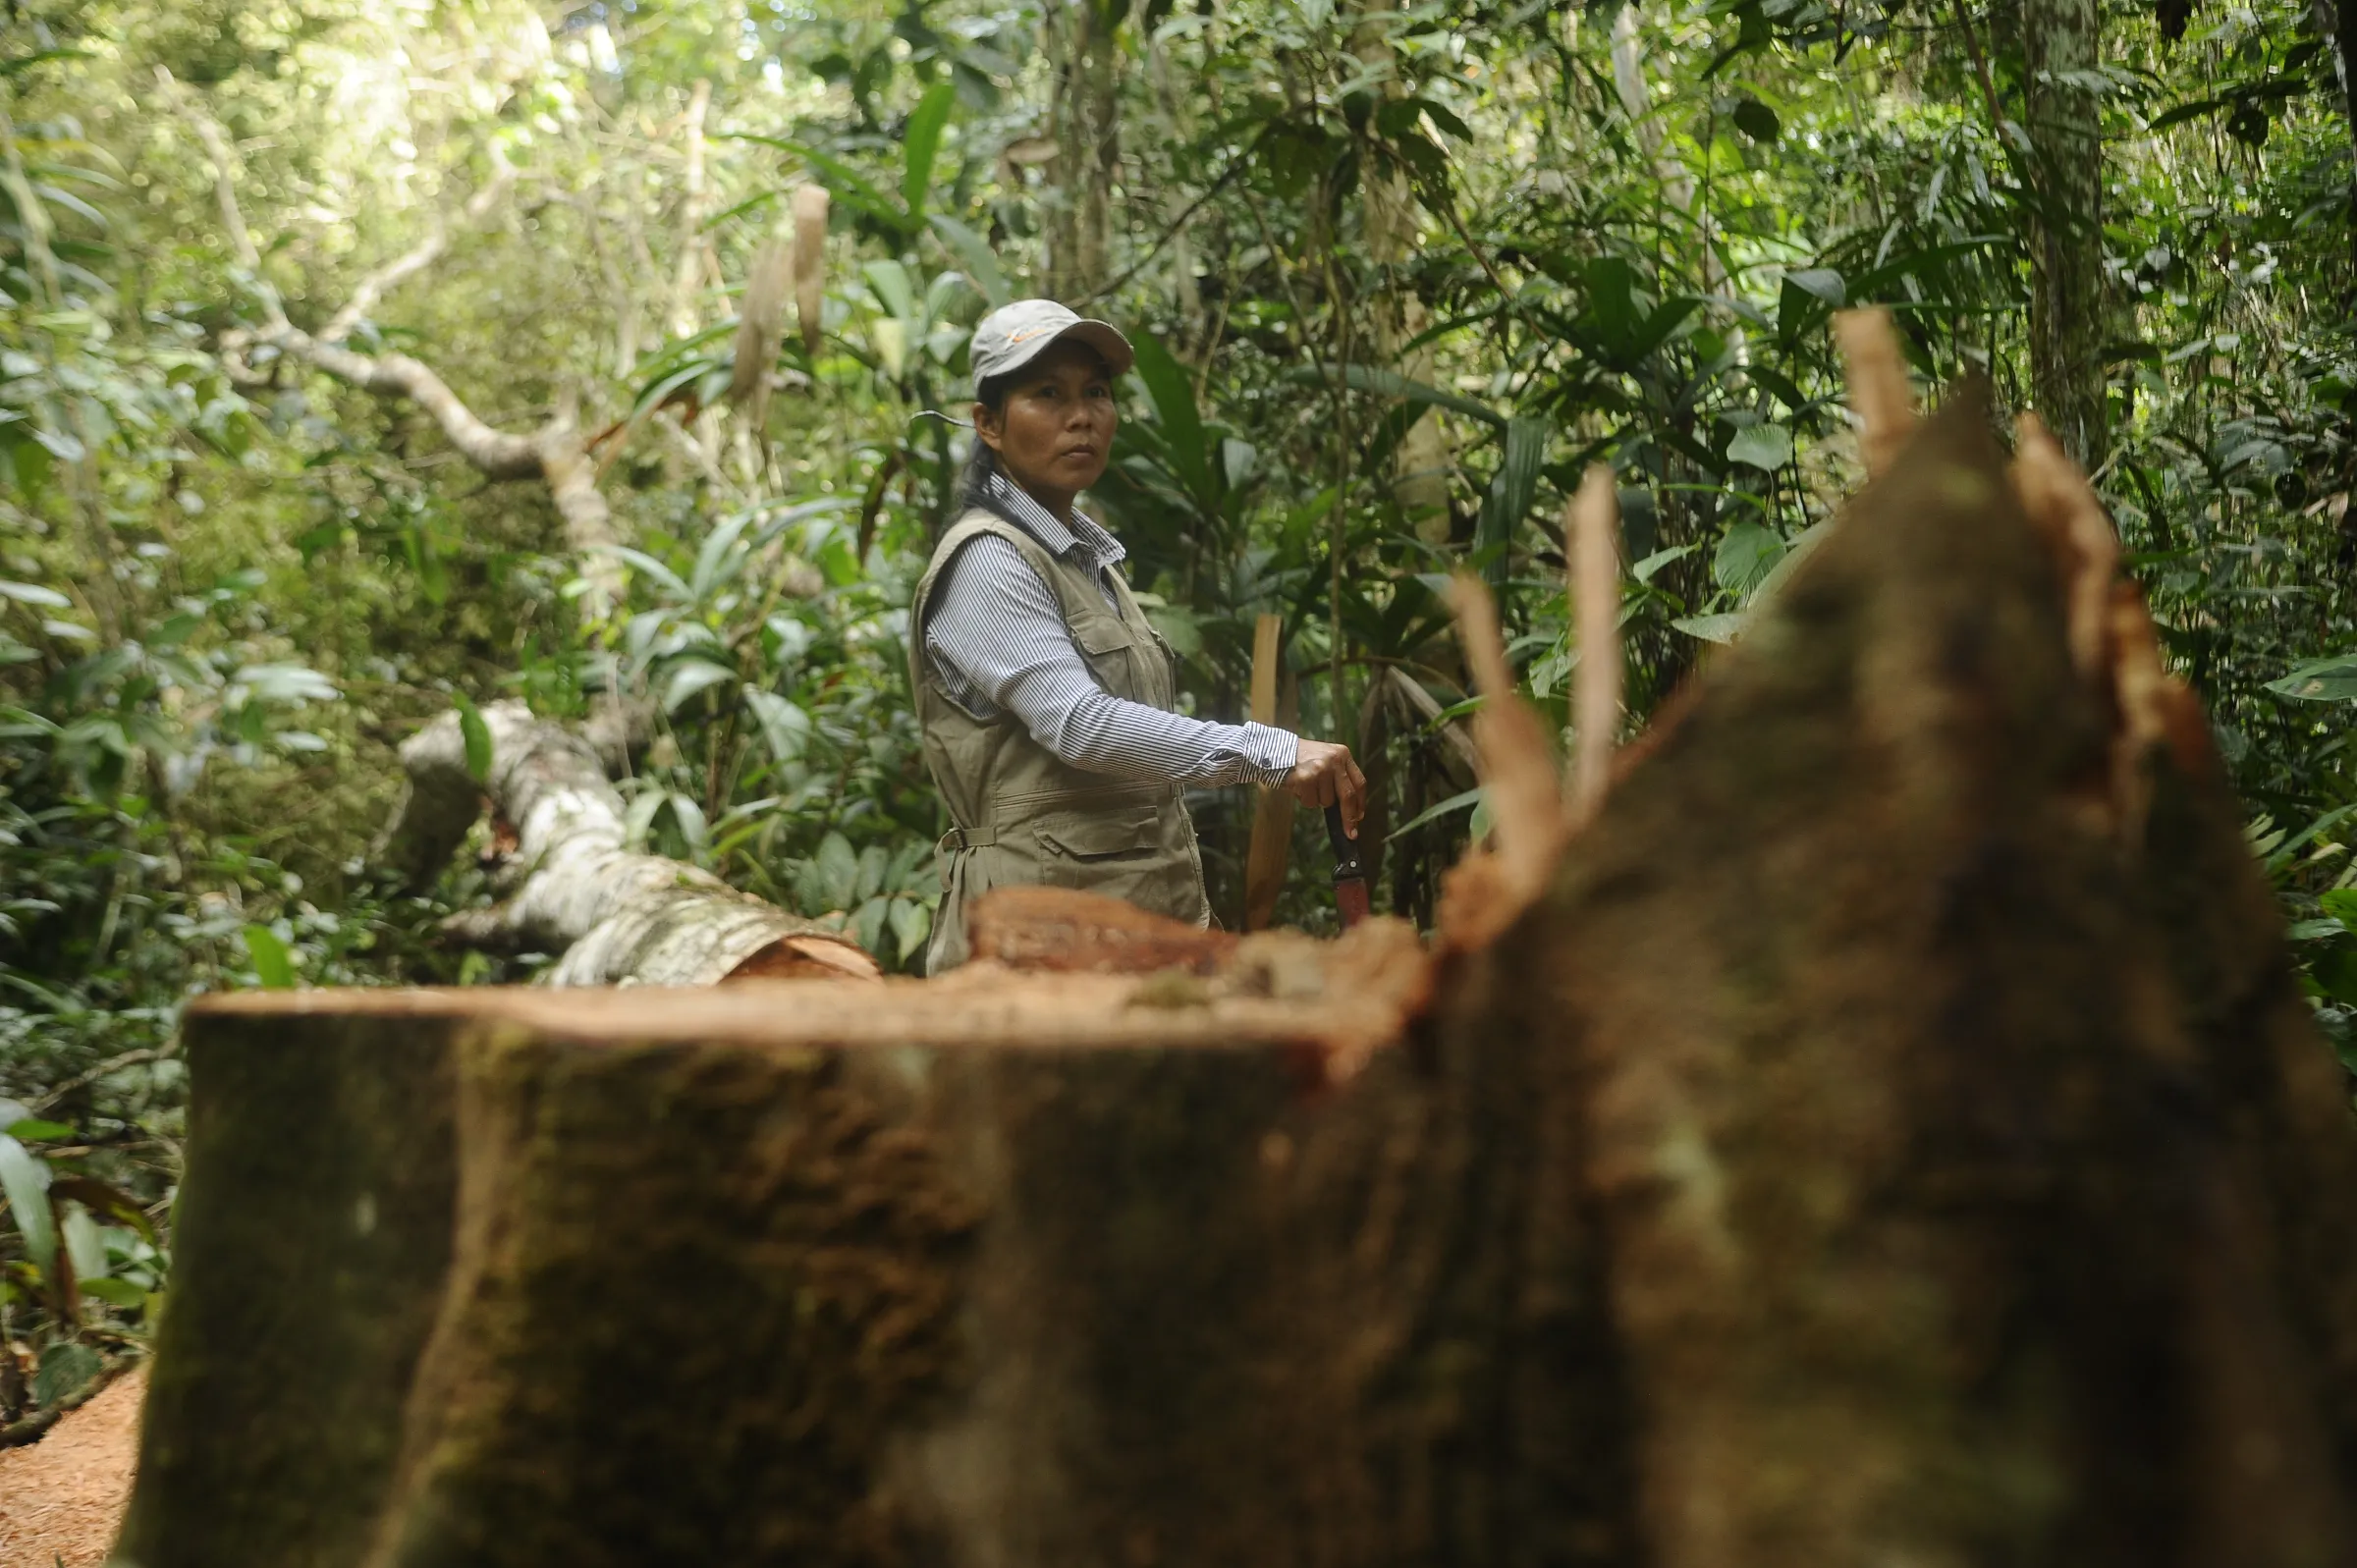 An indigenous woman looks at a felled tree while on patrol in a forest near Flor de Ucayali, Peru